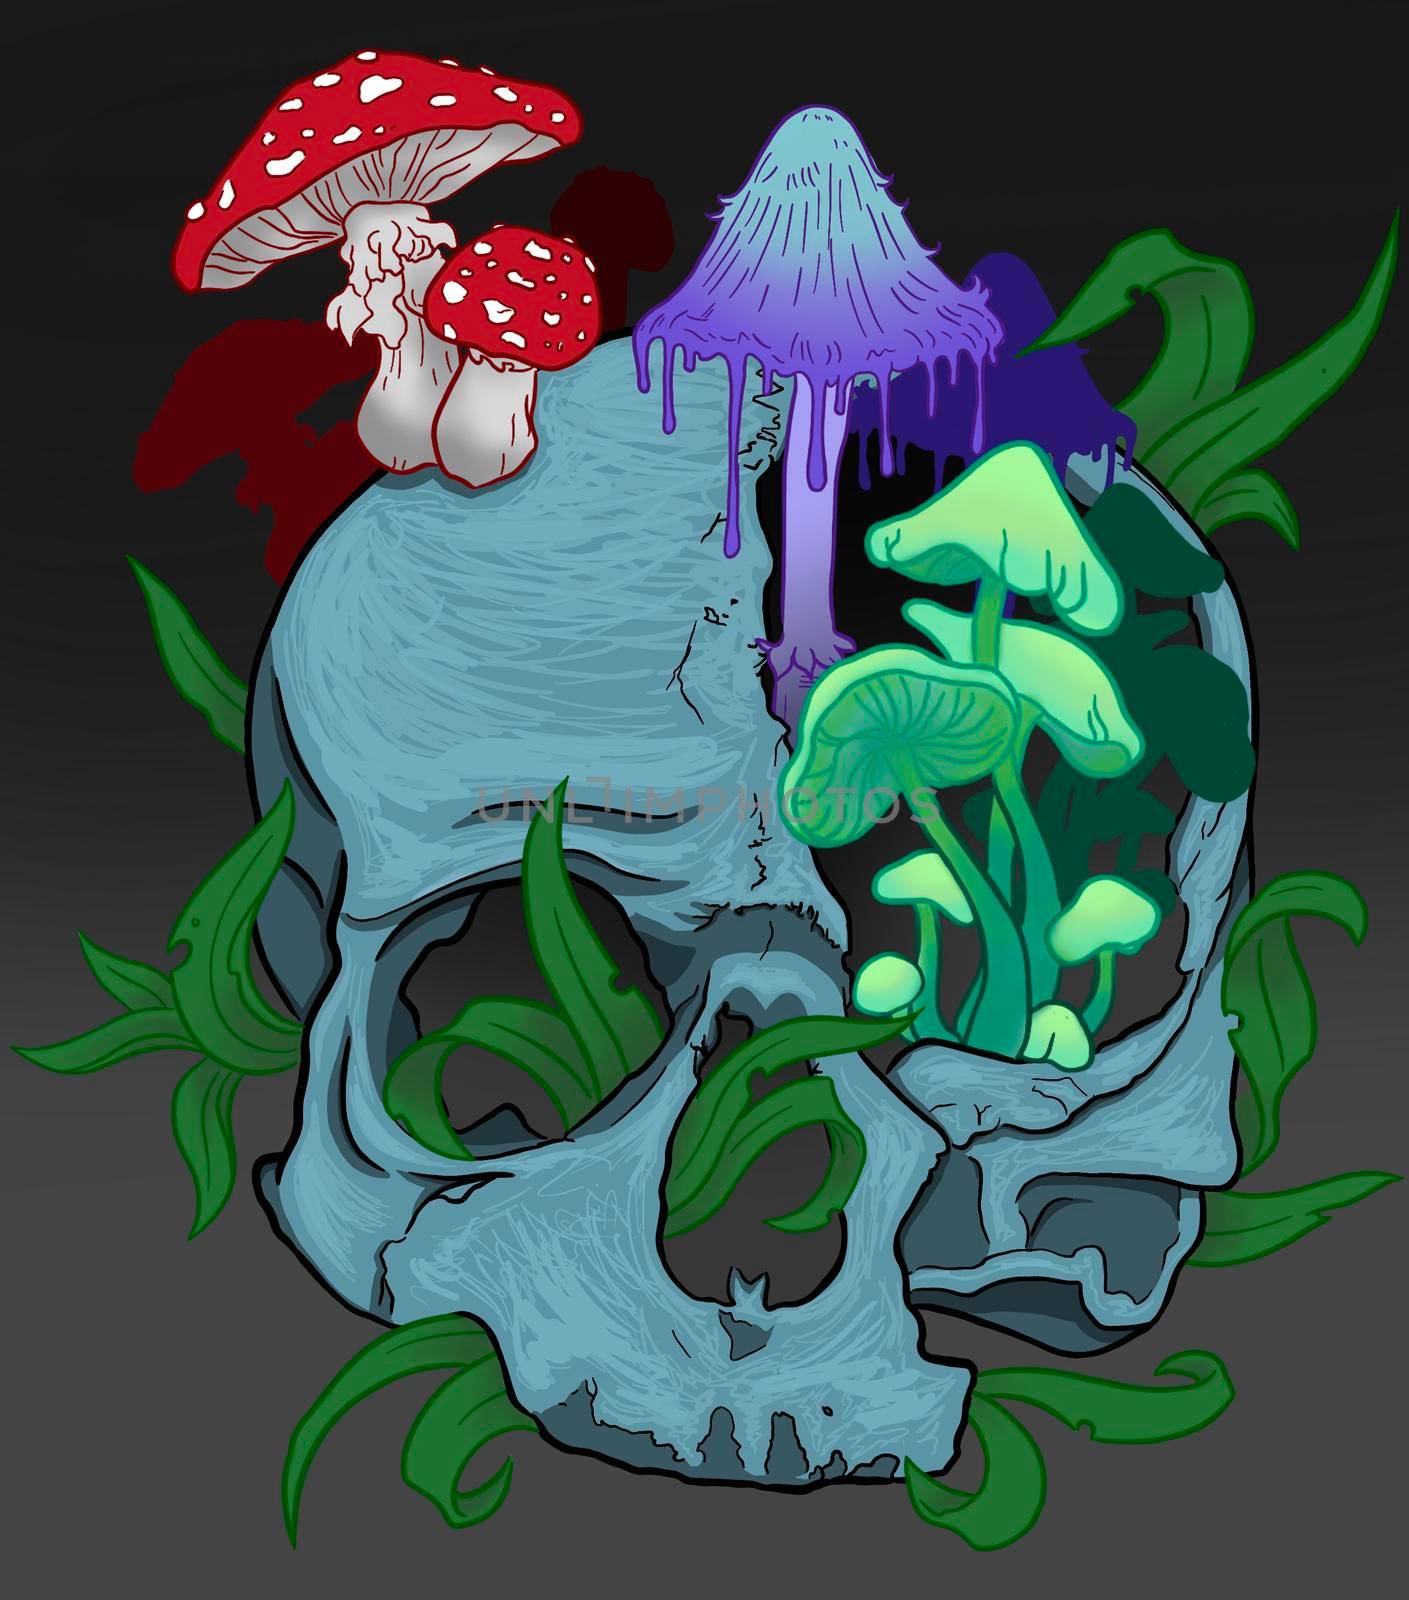 art skull with bright unusual mushrooms in color on a gray background. High quality illustration